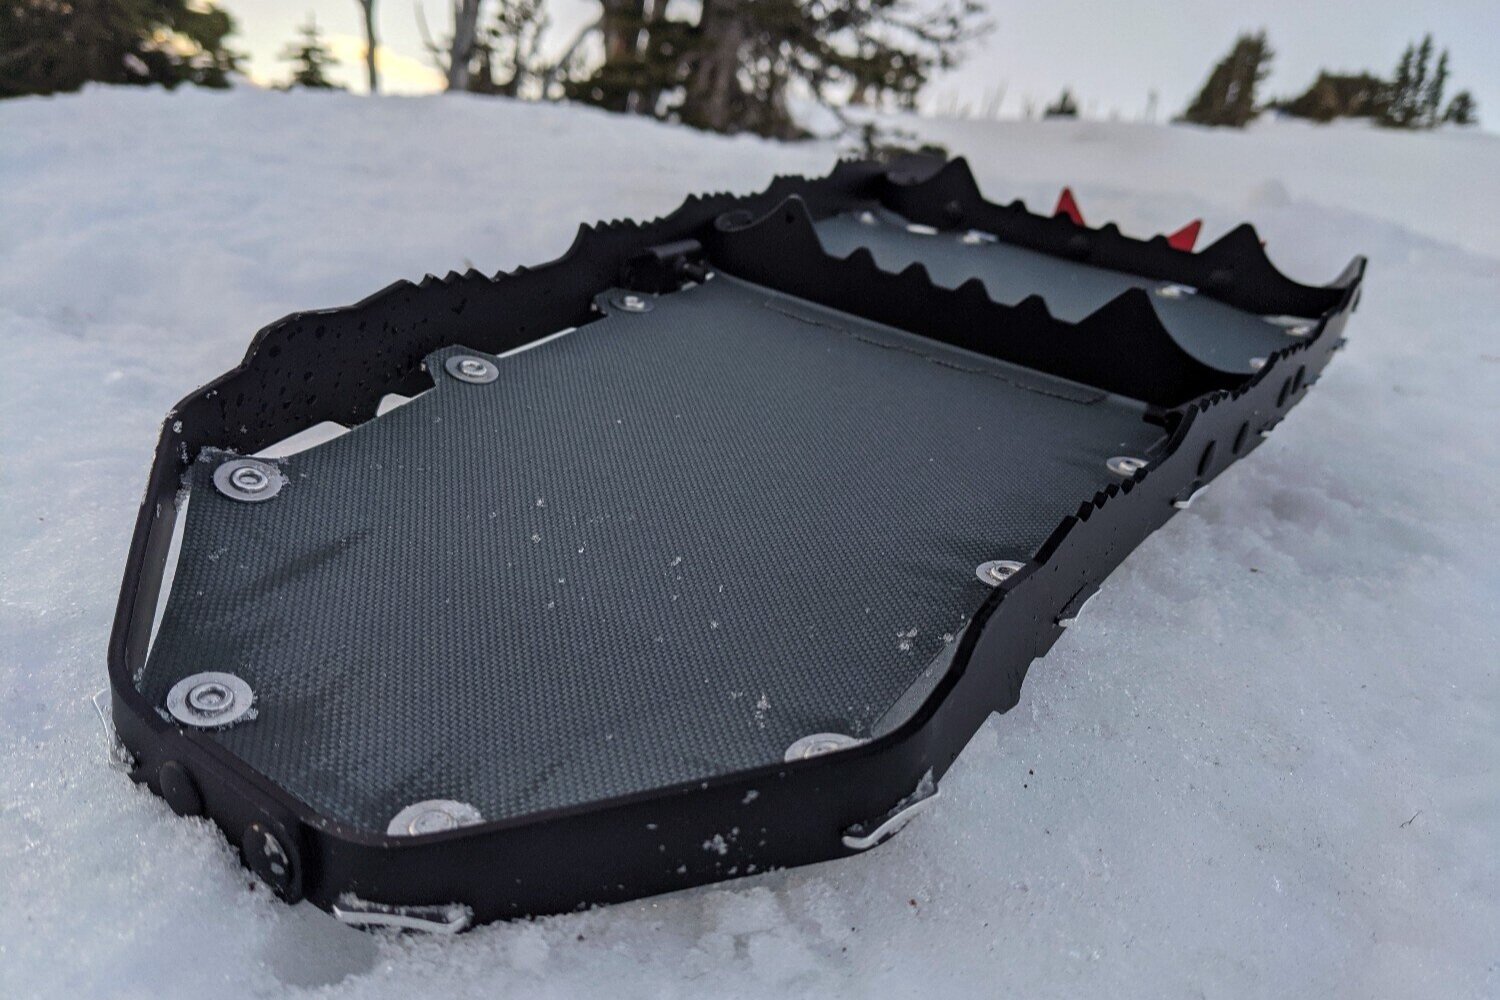 The traction on the MSR Lightning Ascent snowshoes works well in most types of terrain.